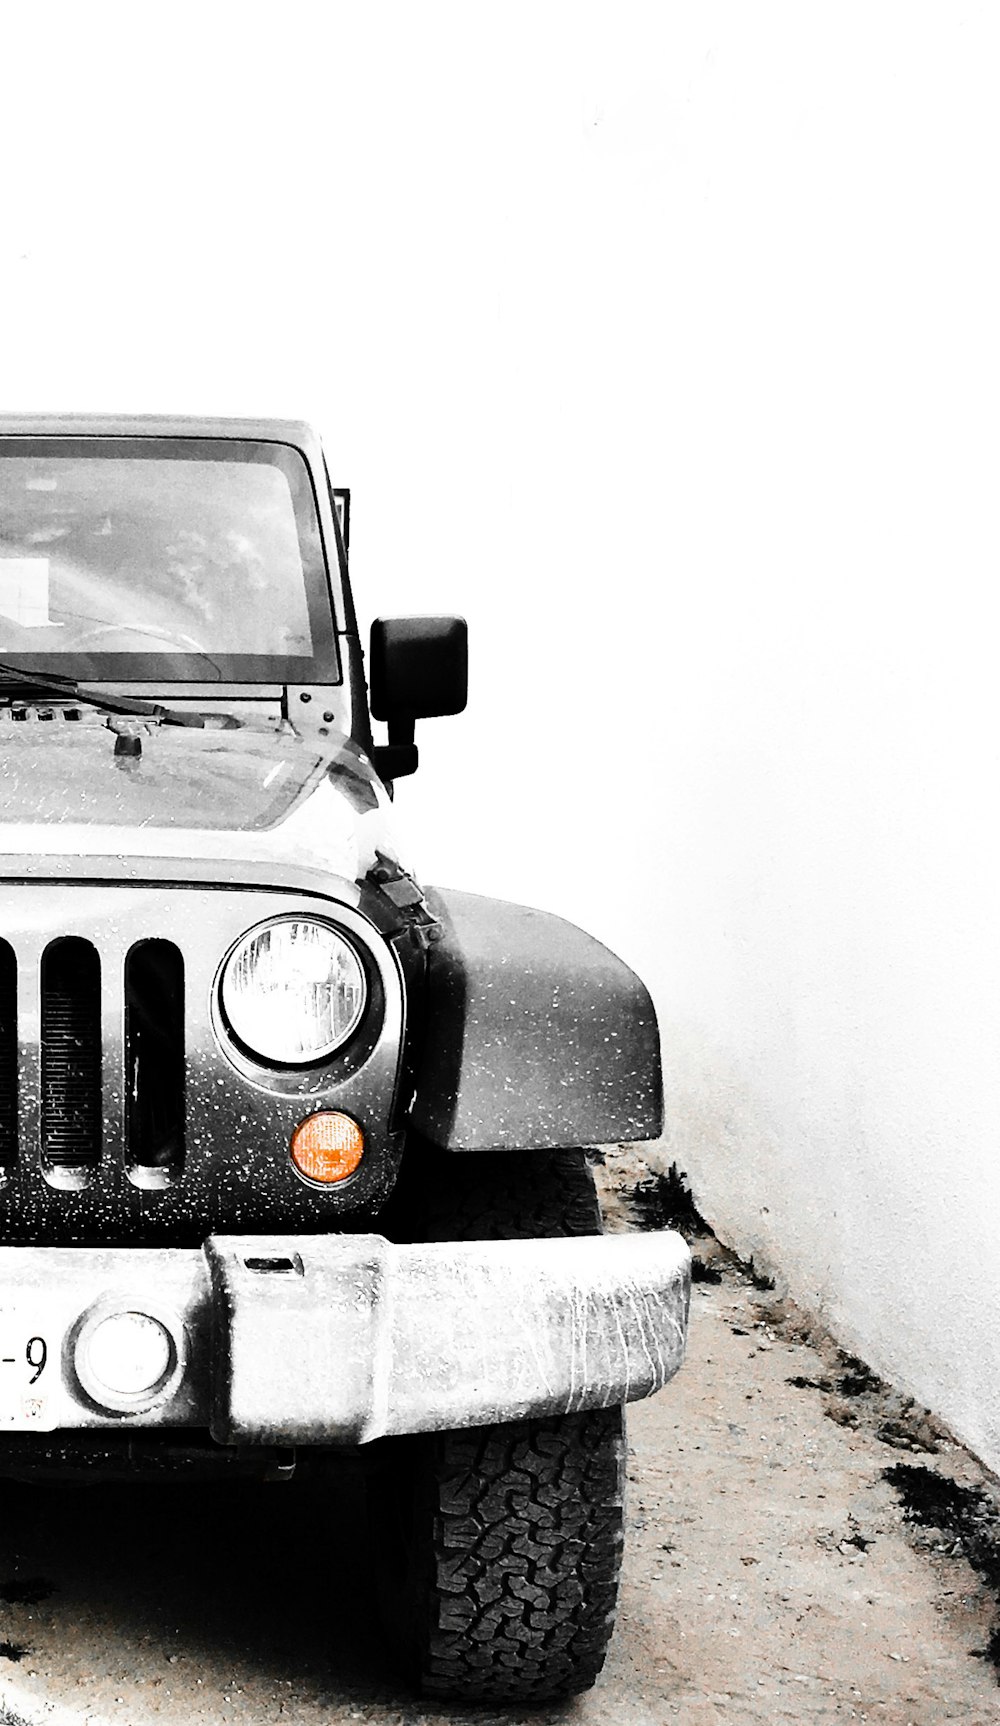 grey Jeep Wrangler on snow-covered ground during daytime